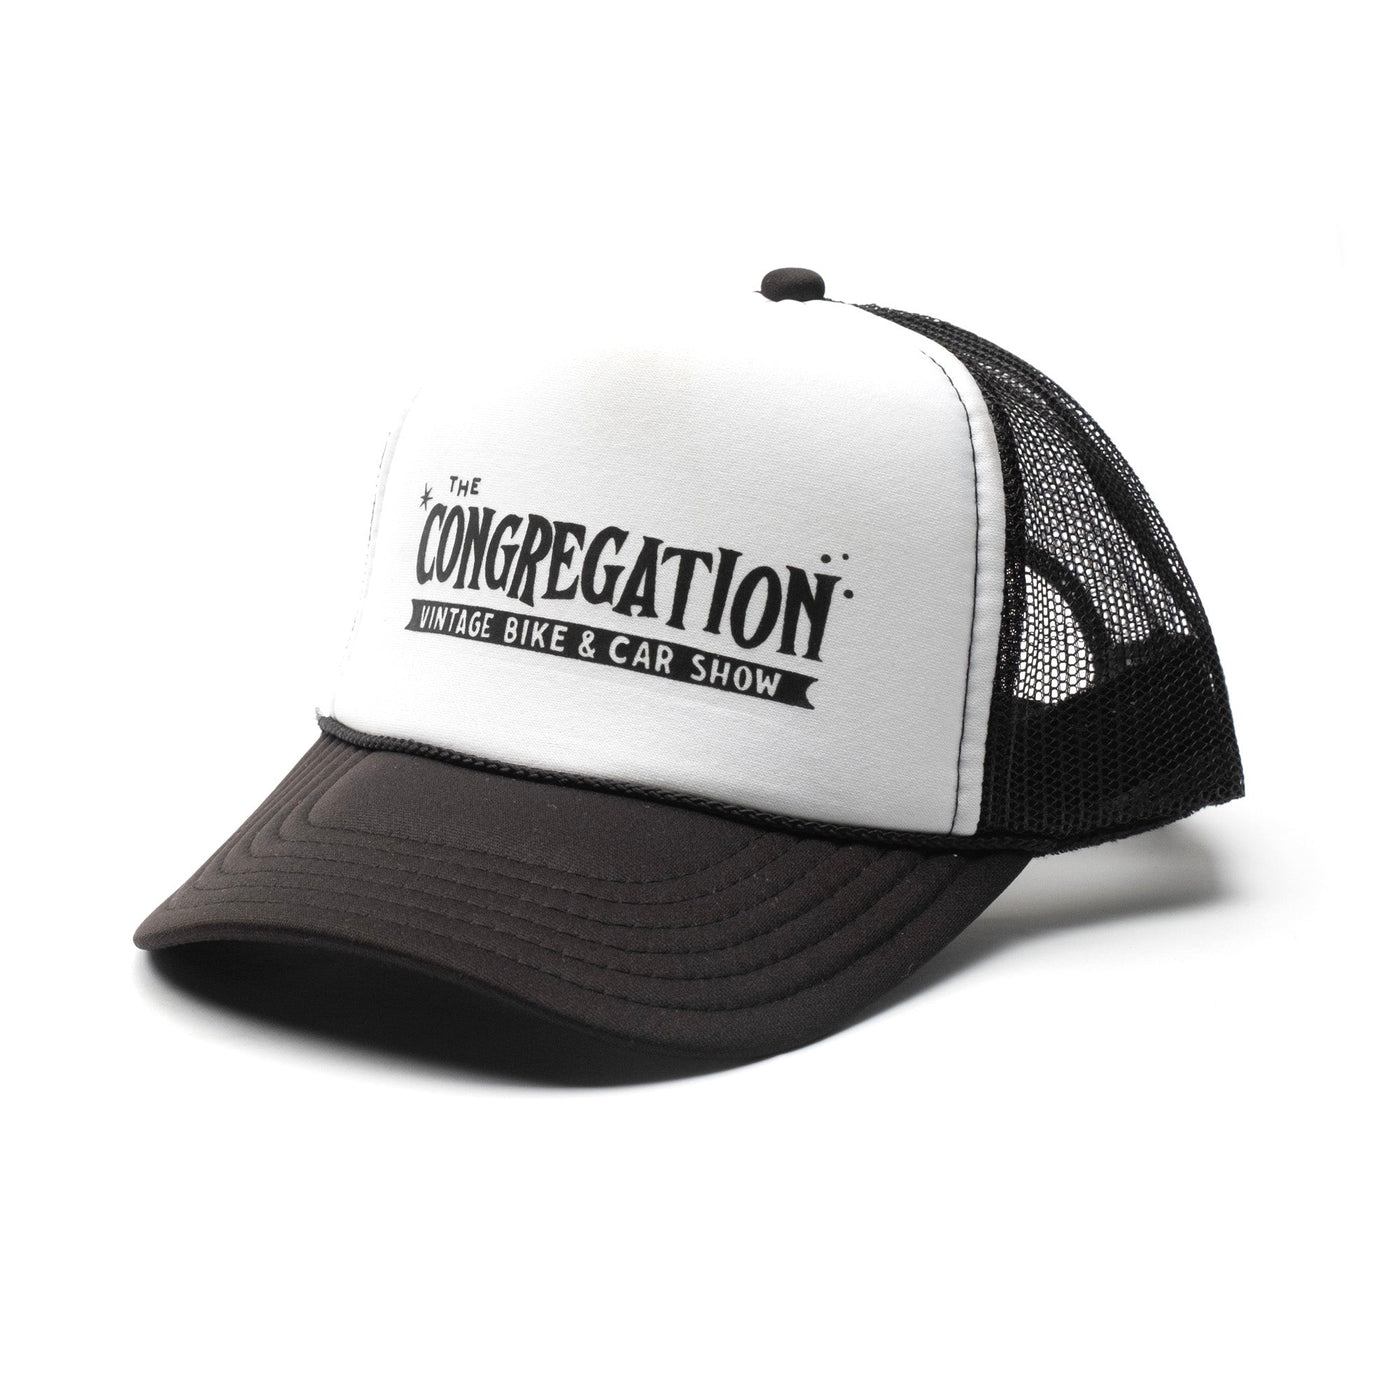 The Congregation Show Hat - Black/White - Prism Supply